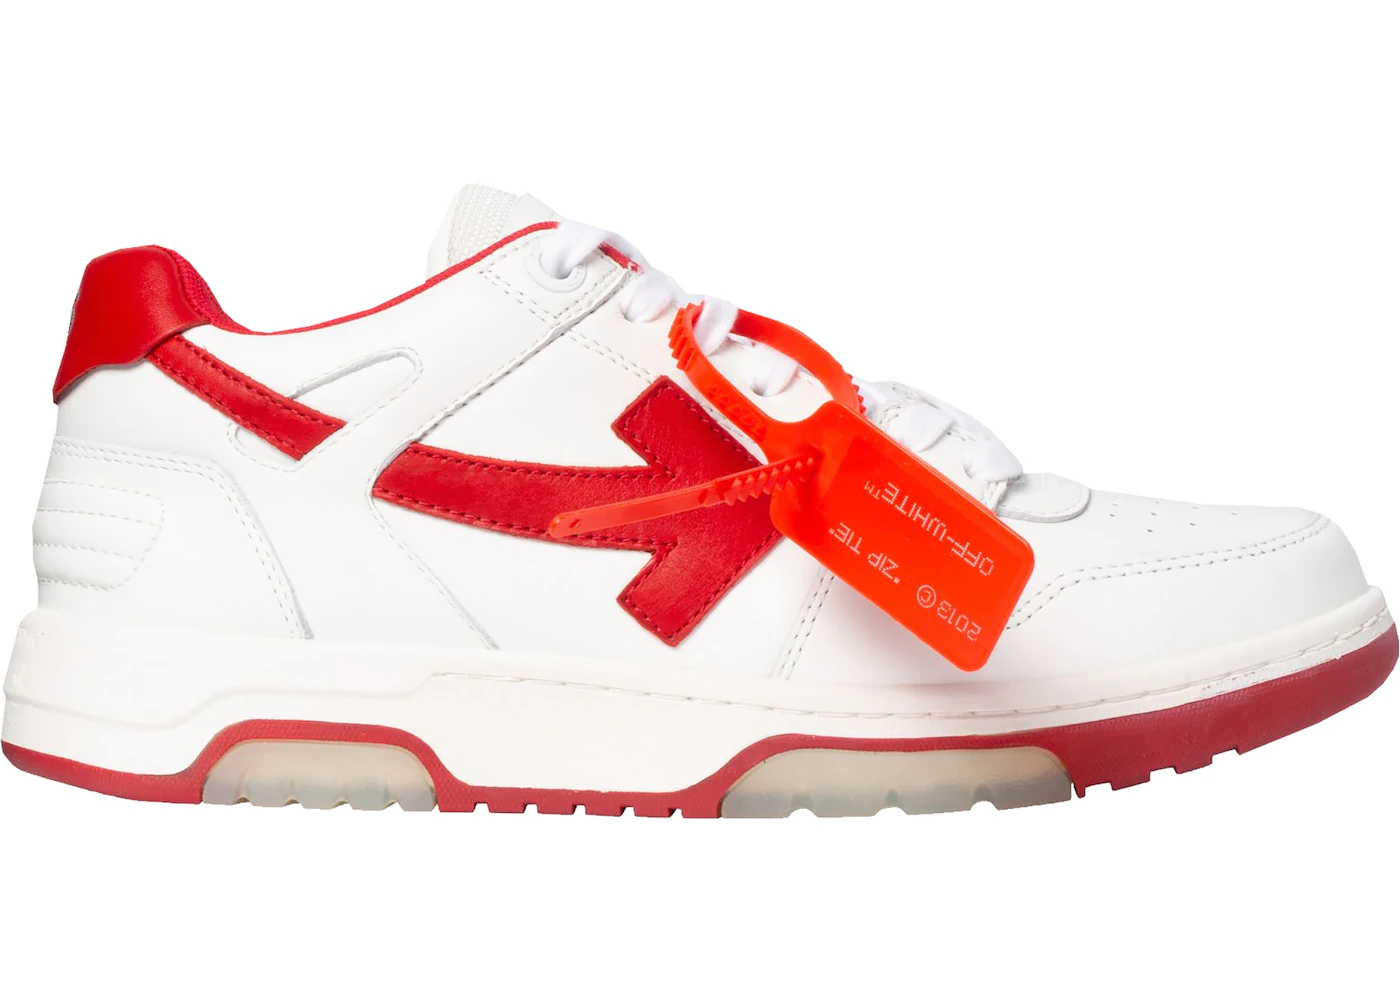 OFF-WHITE OOO Low Out Of Office White Red (Women's) - Sneakers - GB